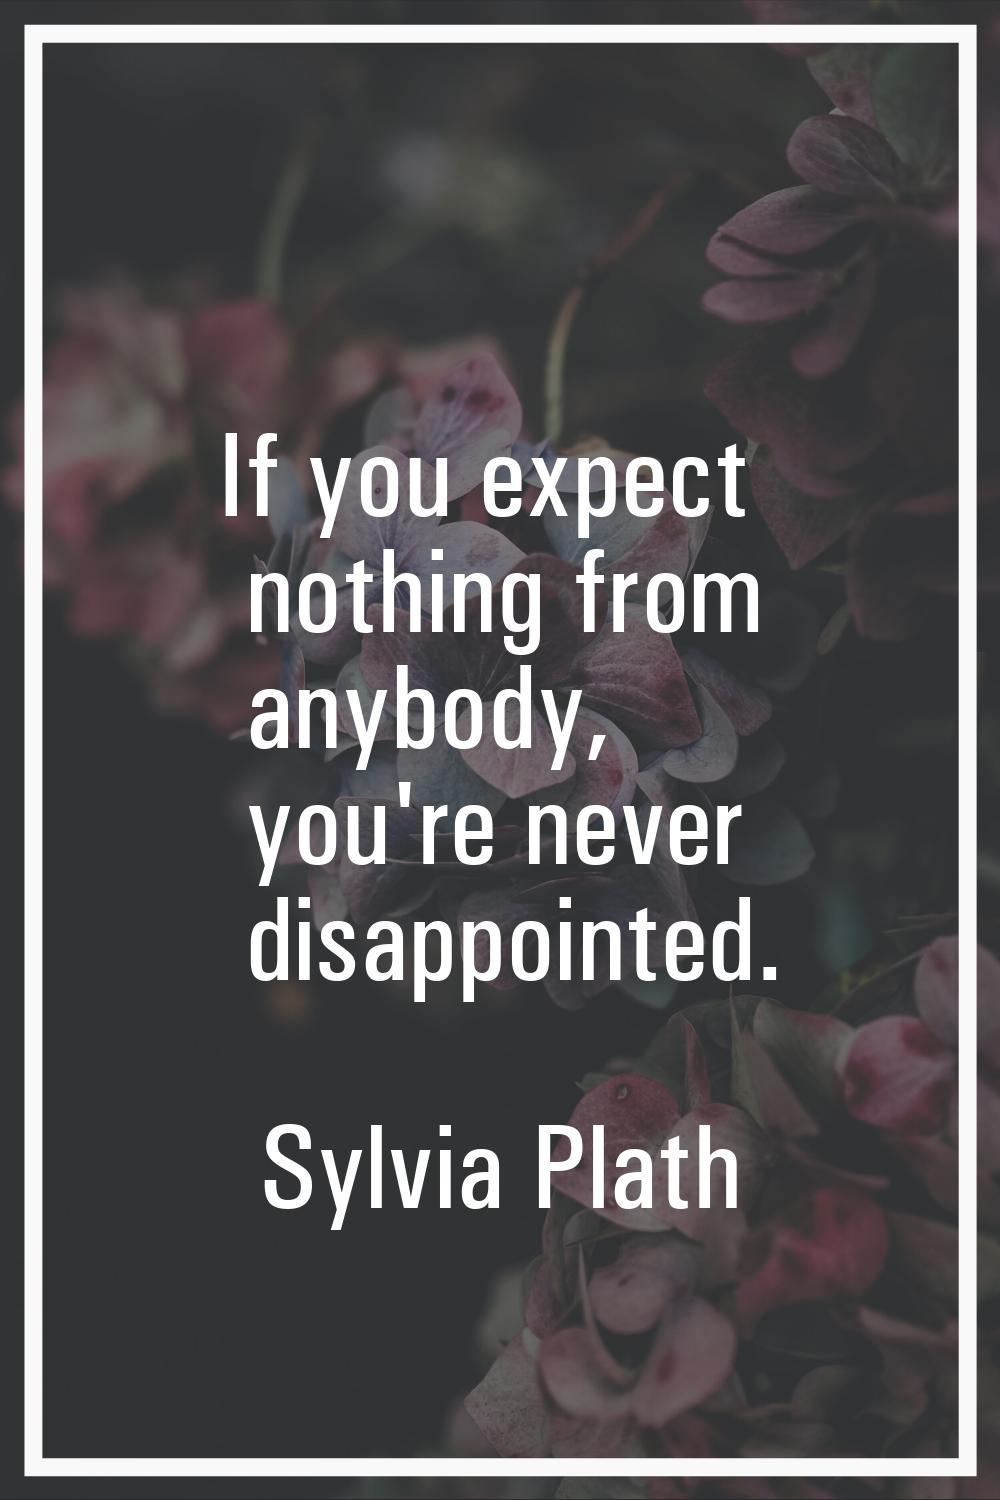 If you expect nothing from anybody, you're never disappointed.